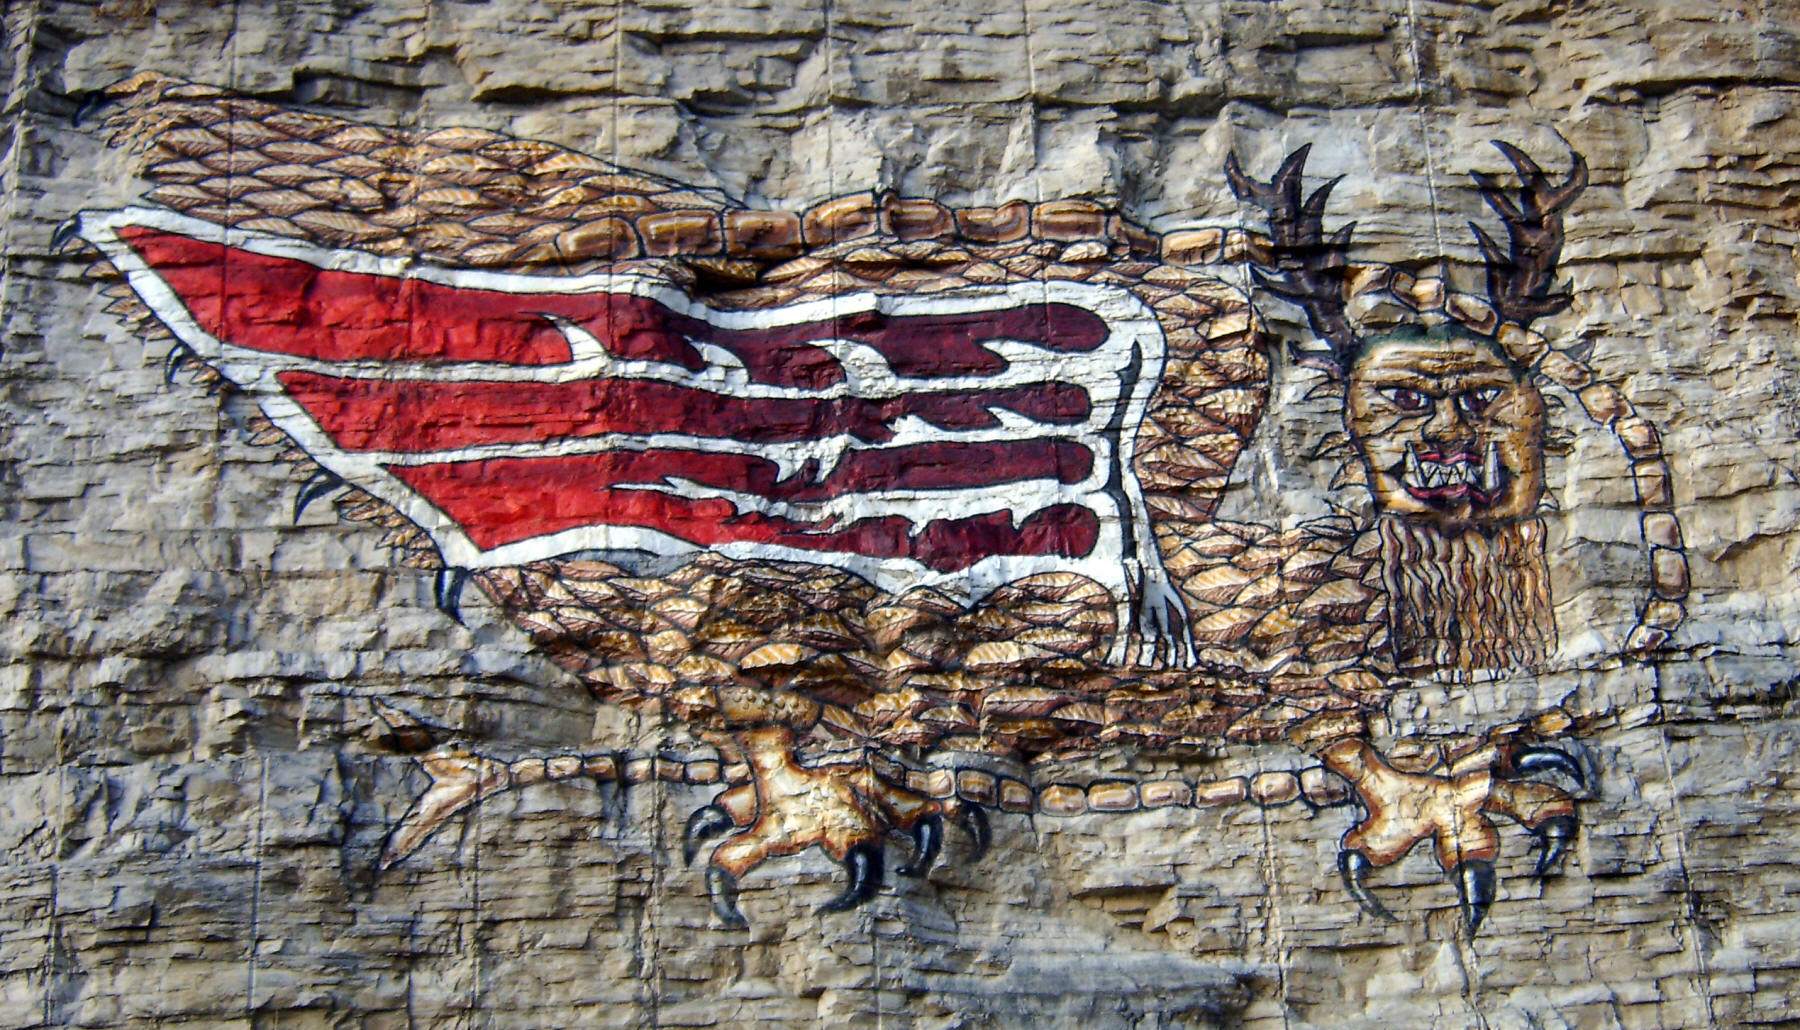 Today's Piasa painting, as it appears on the limestone wall.